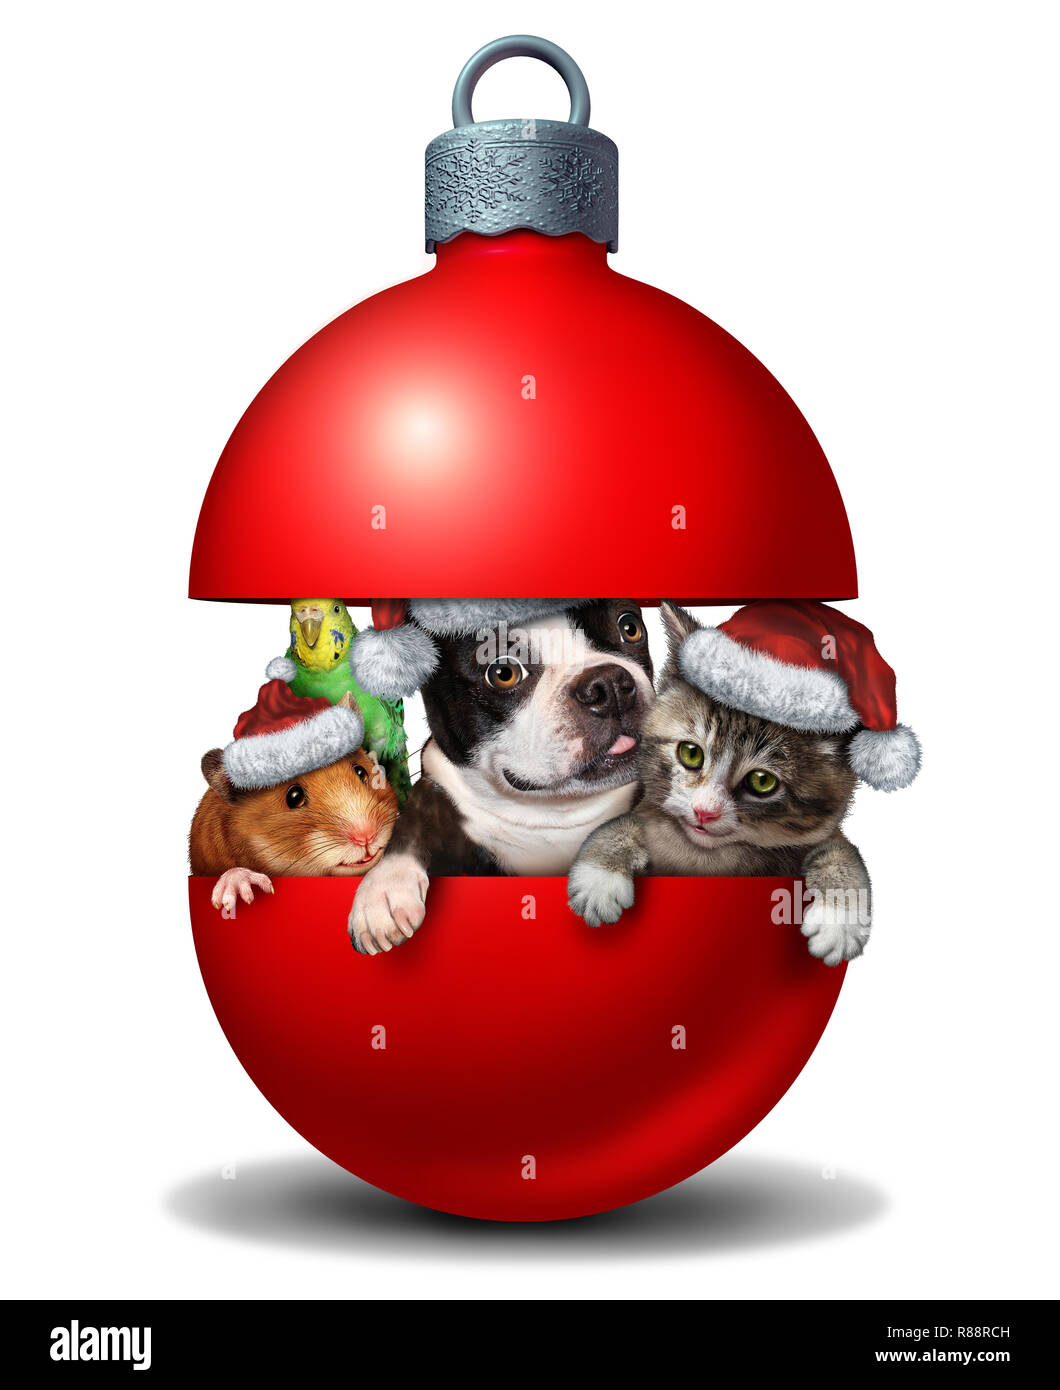 Funny pet decoration holiday christmas ball with a dog cat budgie and hamster wearing winter hats as a symbol of veterinary medicine and pet store or  Stock Photo